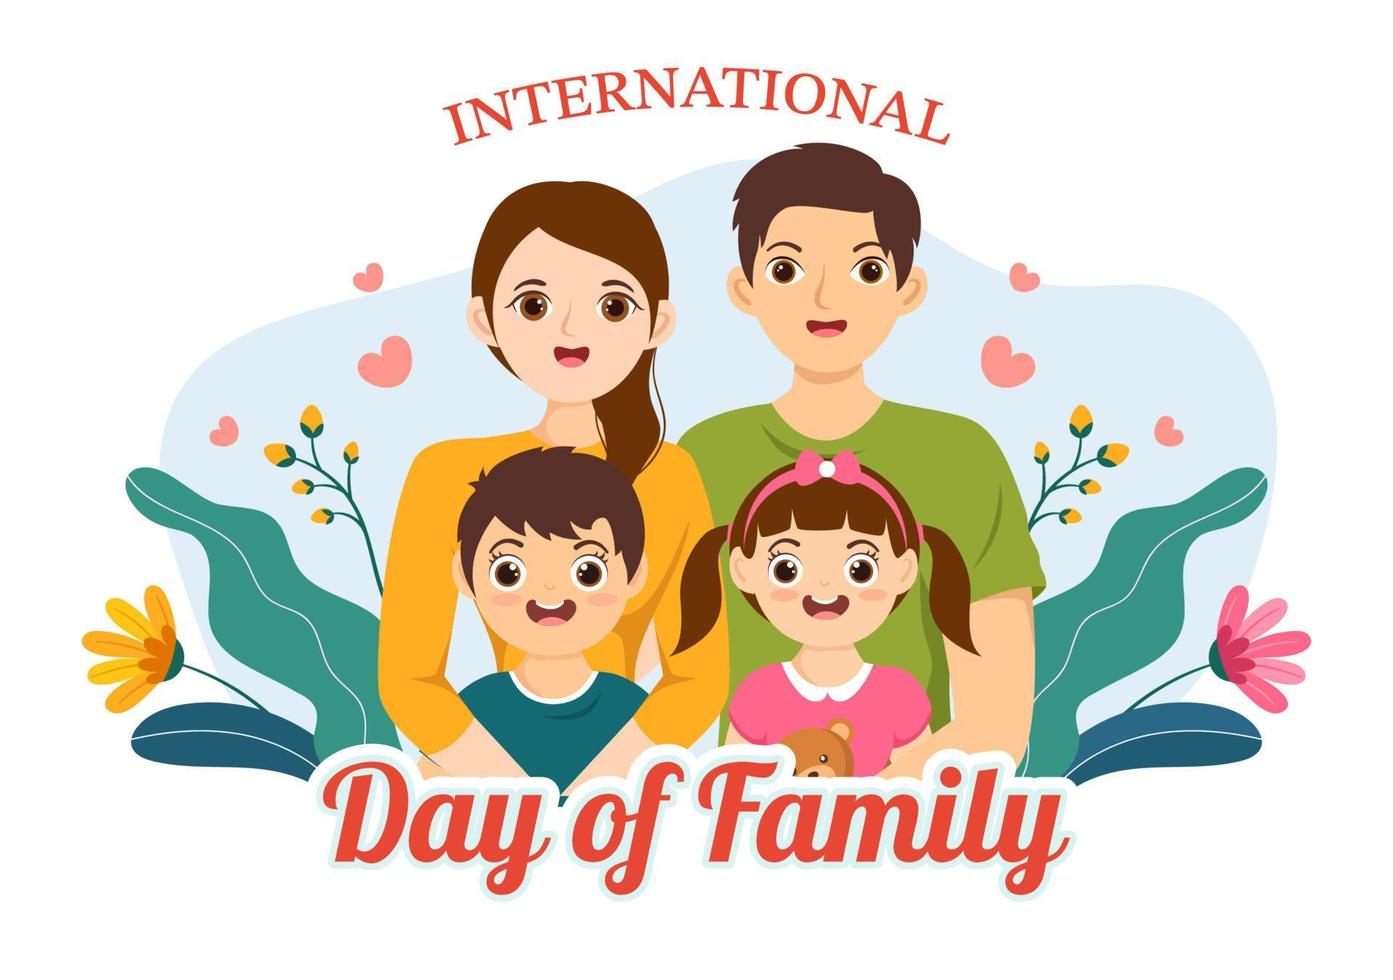 International Day of Family Illustration with Kids, Father and Mother for Web Banner or Landing Page in Flat Cartoon Hand Drawn Templates vector